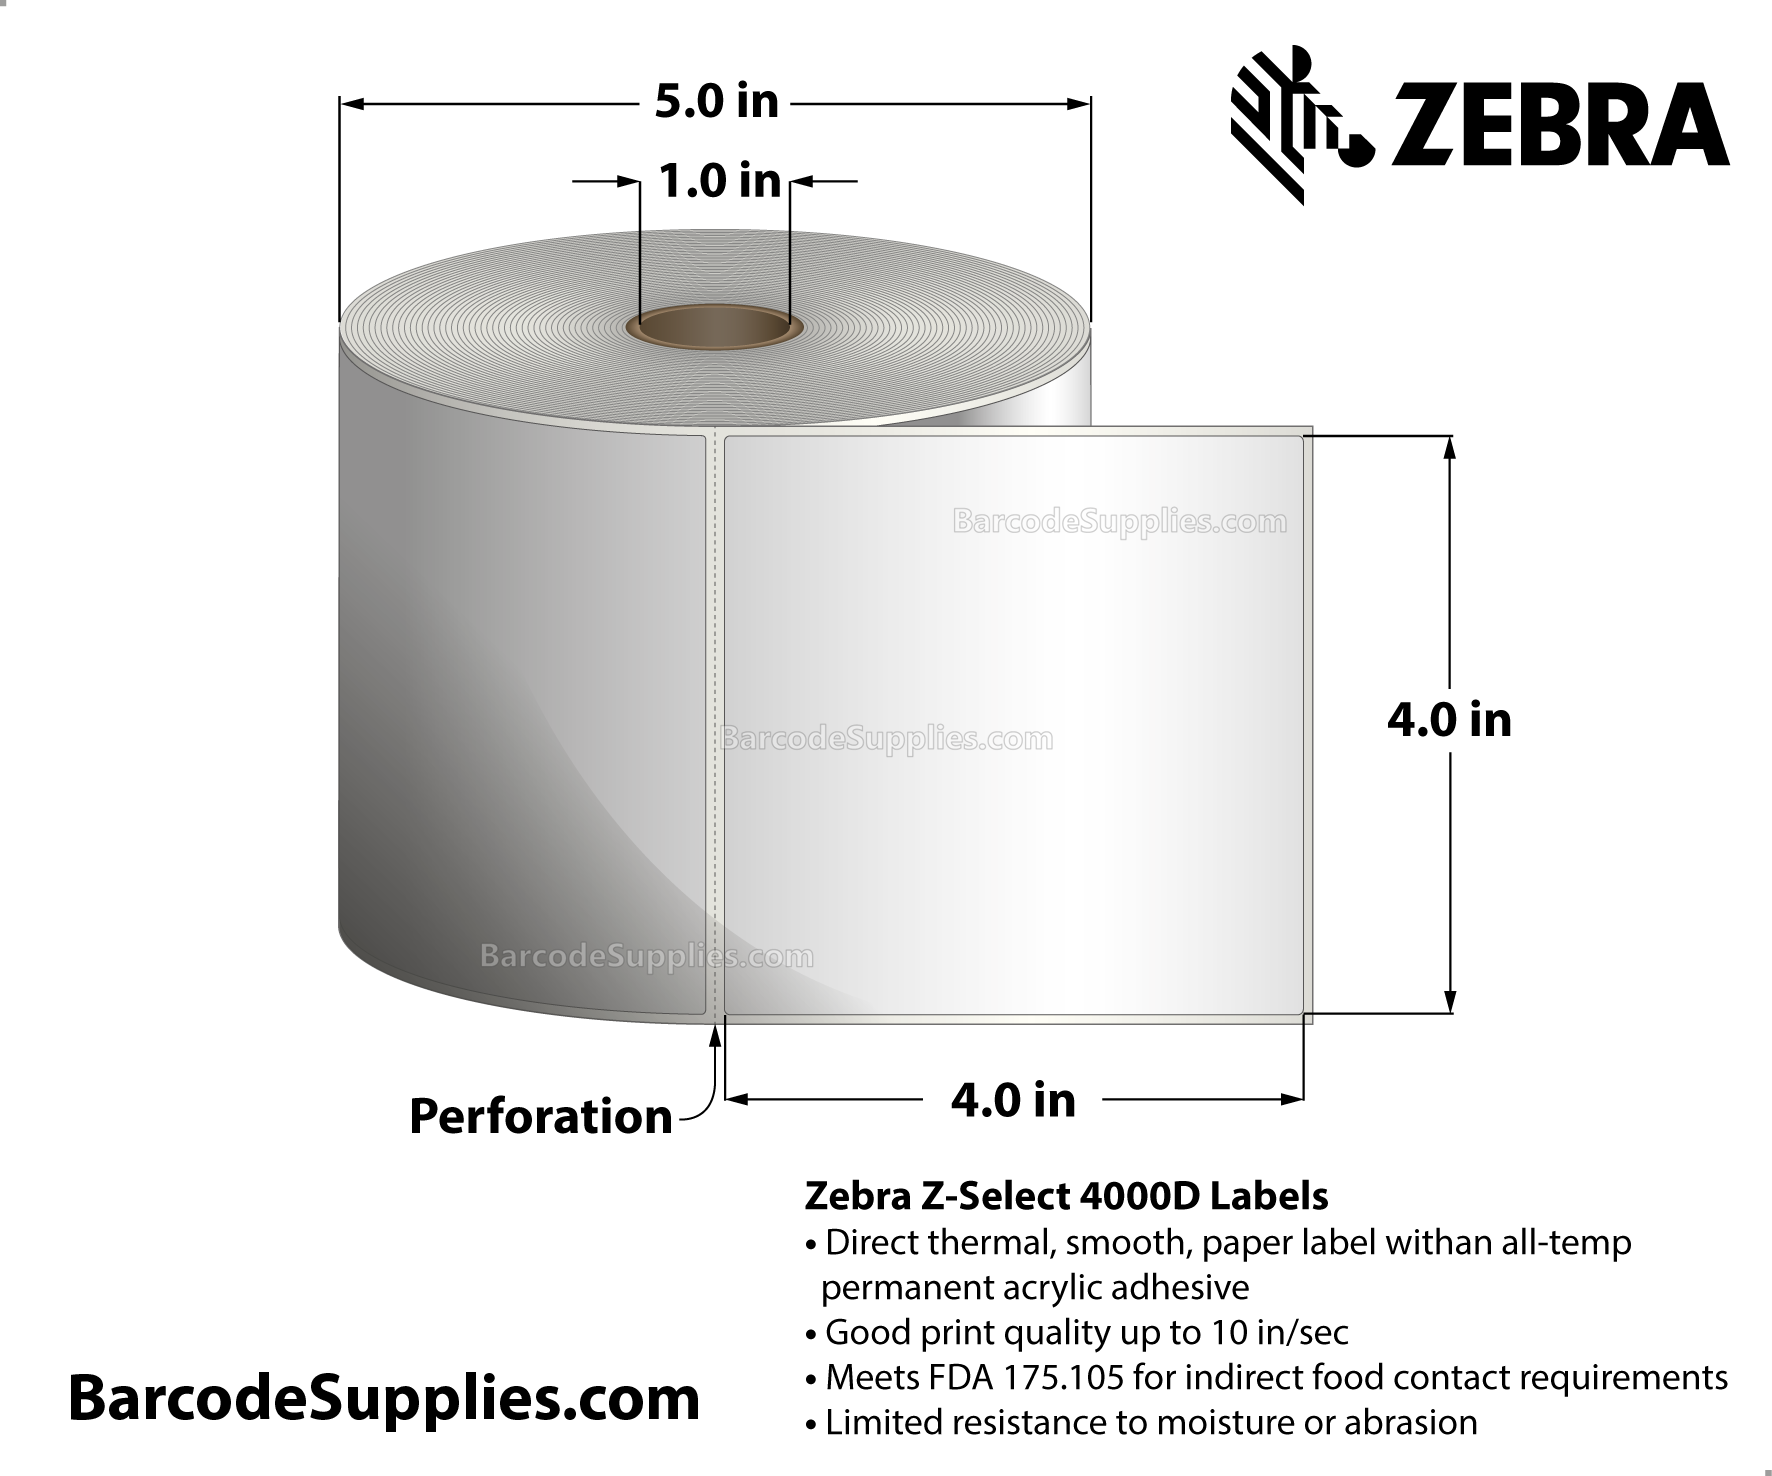 4 x 4 Direct Thermal White Z-Select 4000D Labels With All-Temp Adhesive - Perforated - 700 Labels Per Roll - Carton Of 12 Rolls - 8400 Labels Total - MPN: 10015345